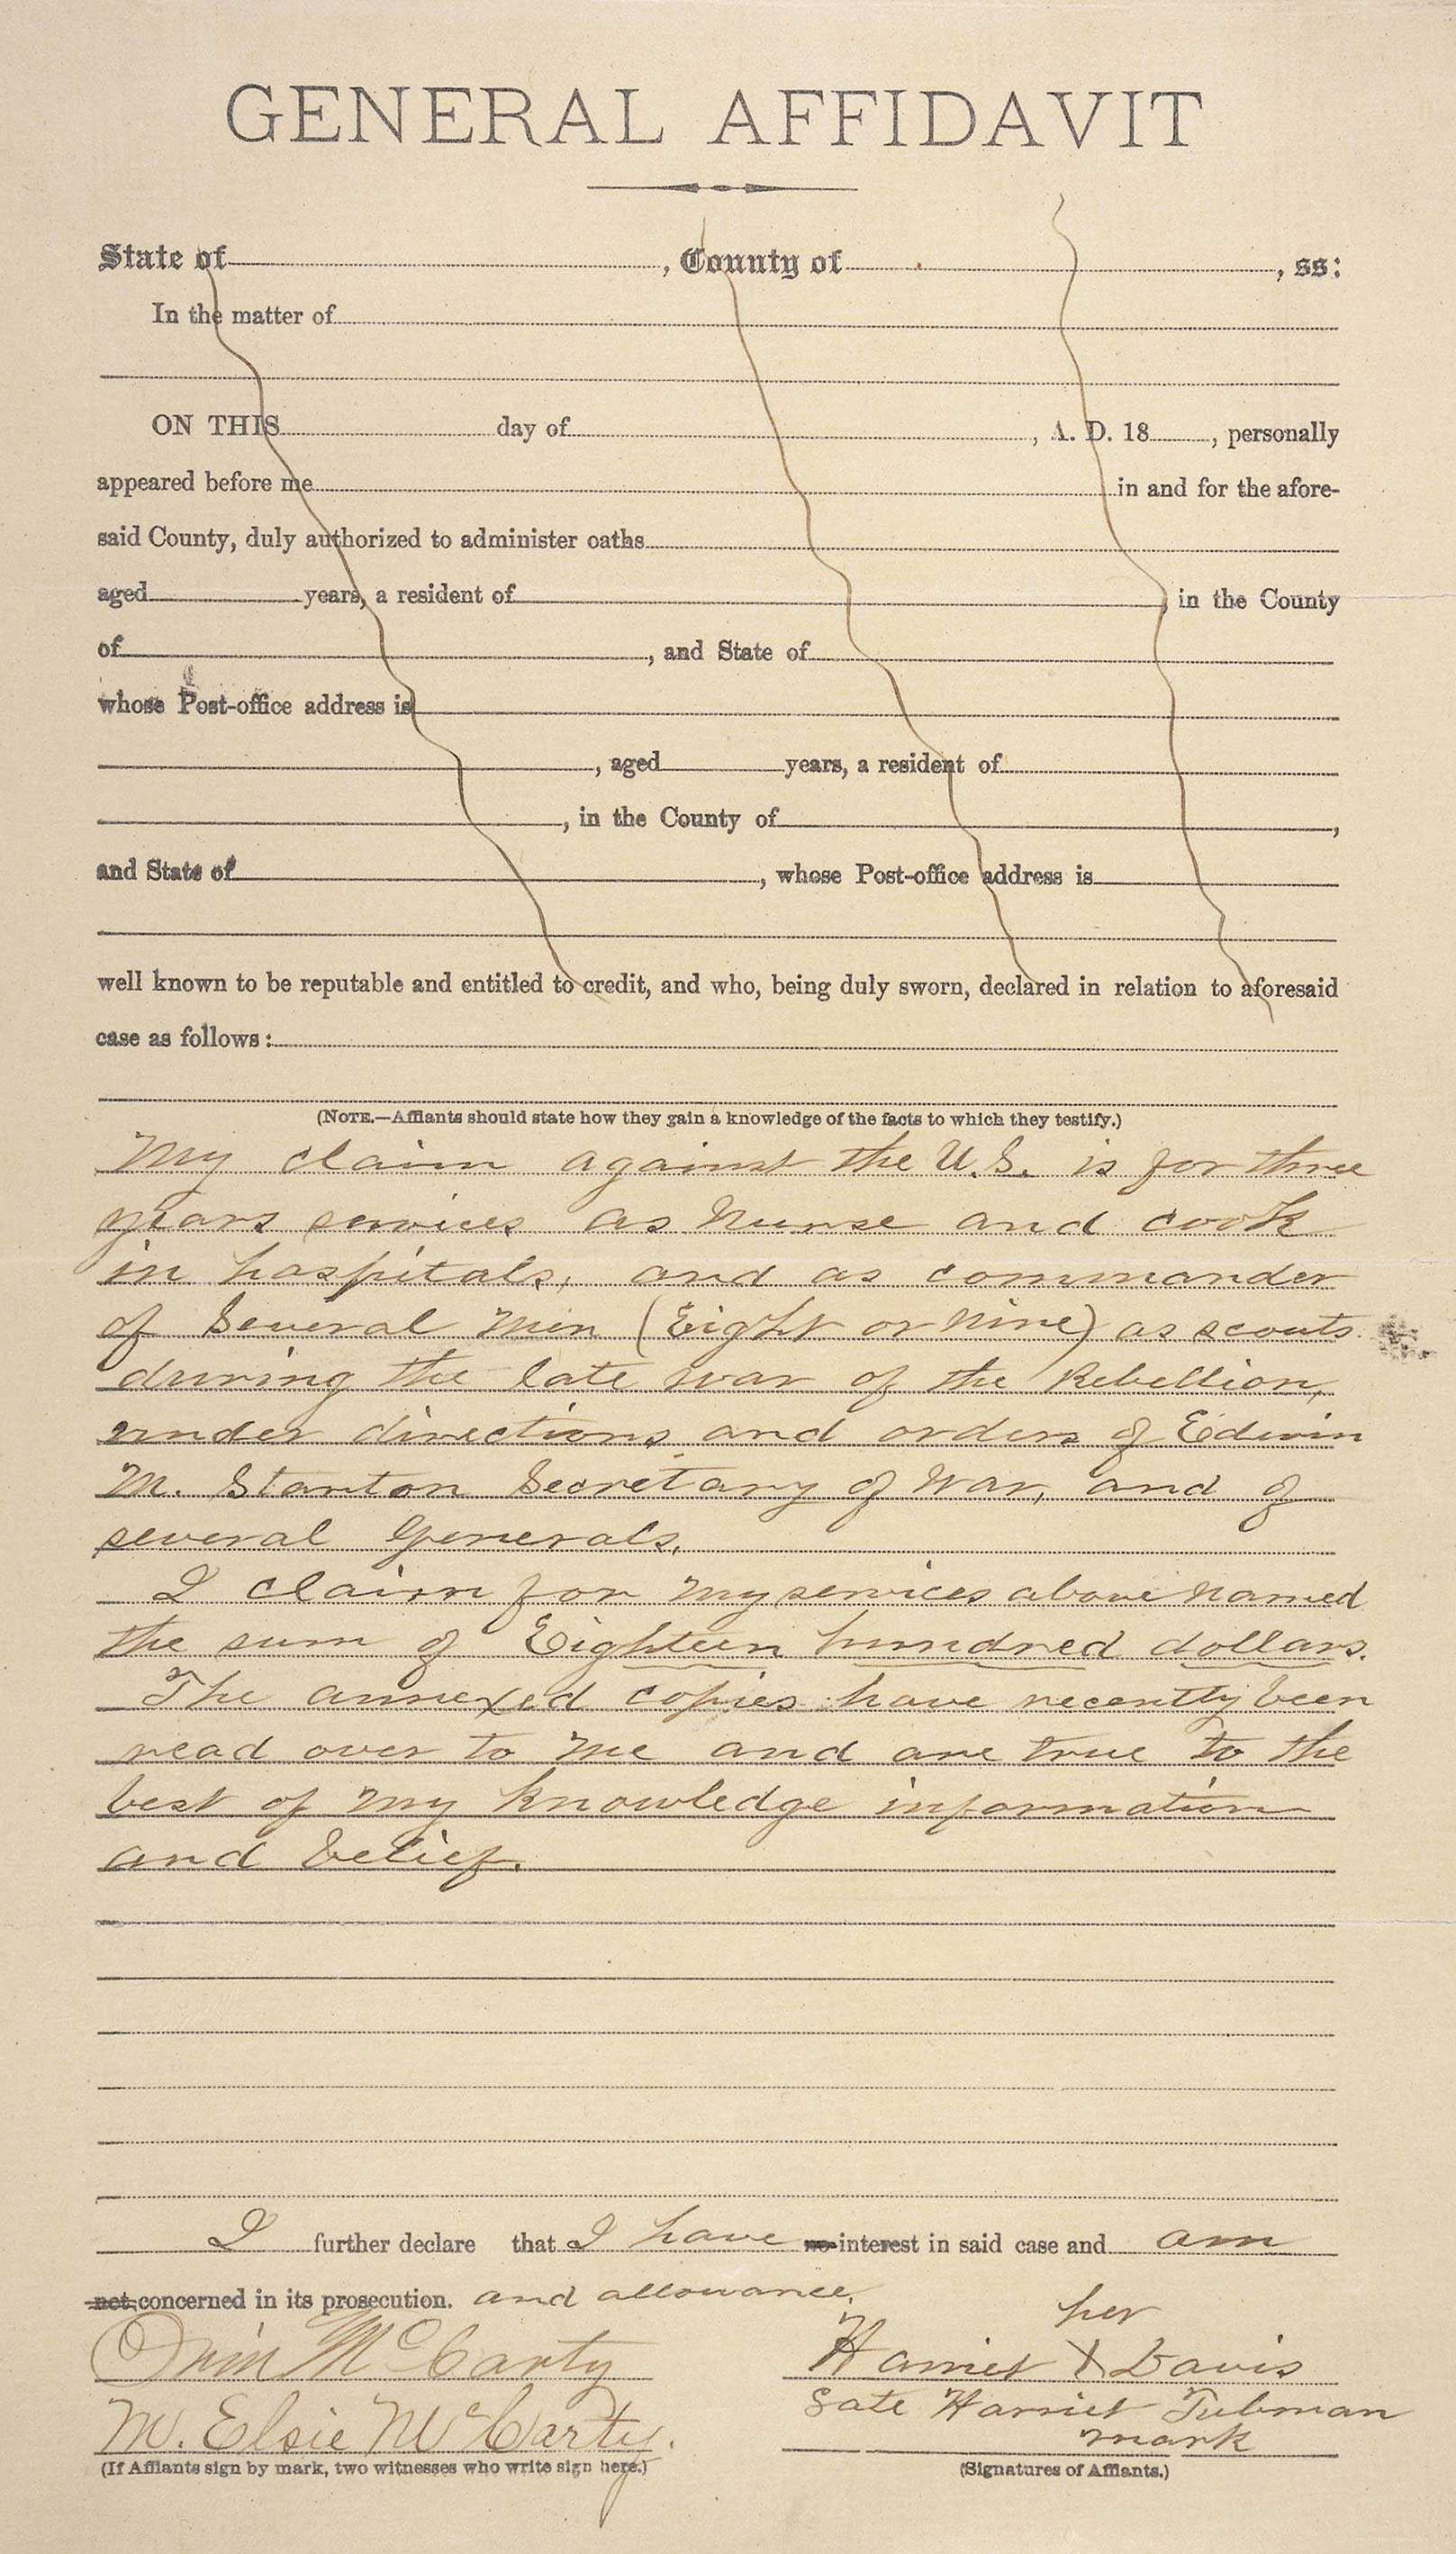 A yellow affidavit form. The notes part is completed by hand and signed at the bottom.